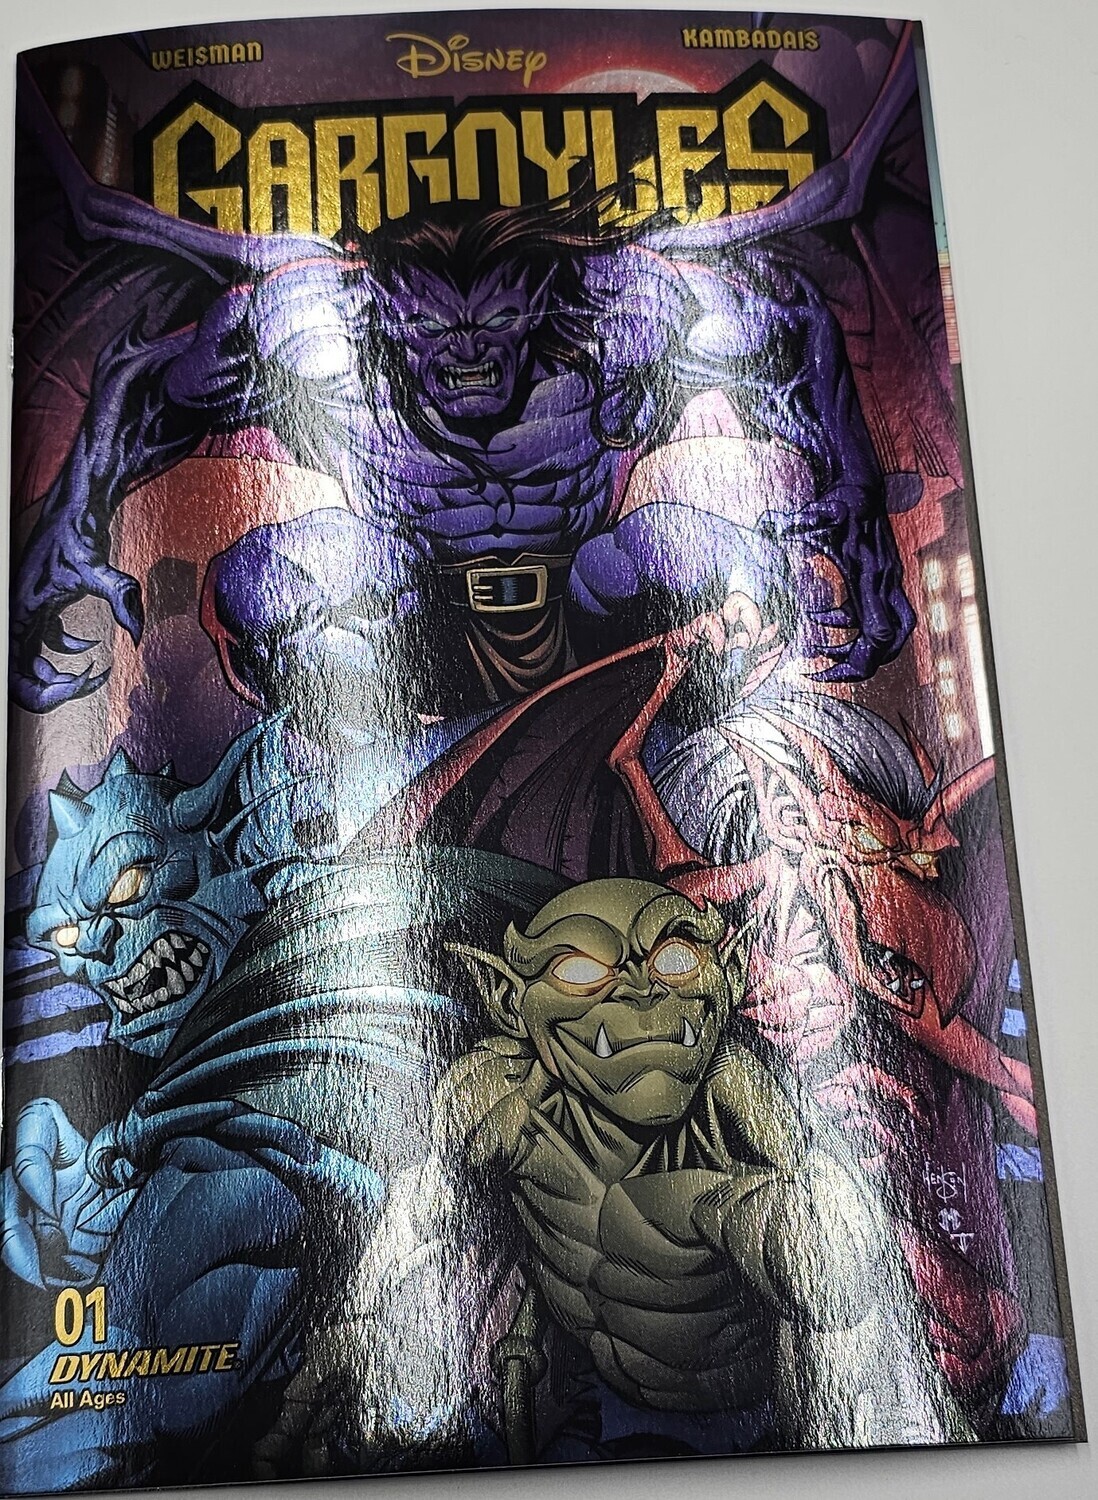 GARGOYLES #1 (FOIL COVER) ONLY 150 EXIST! ALTERED REALITY ENTERTAINMENT EXCLUSIVE